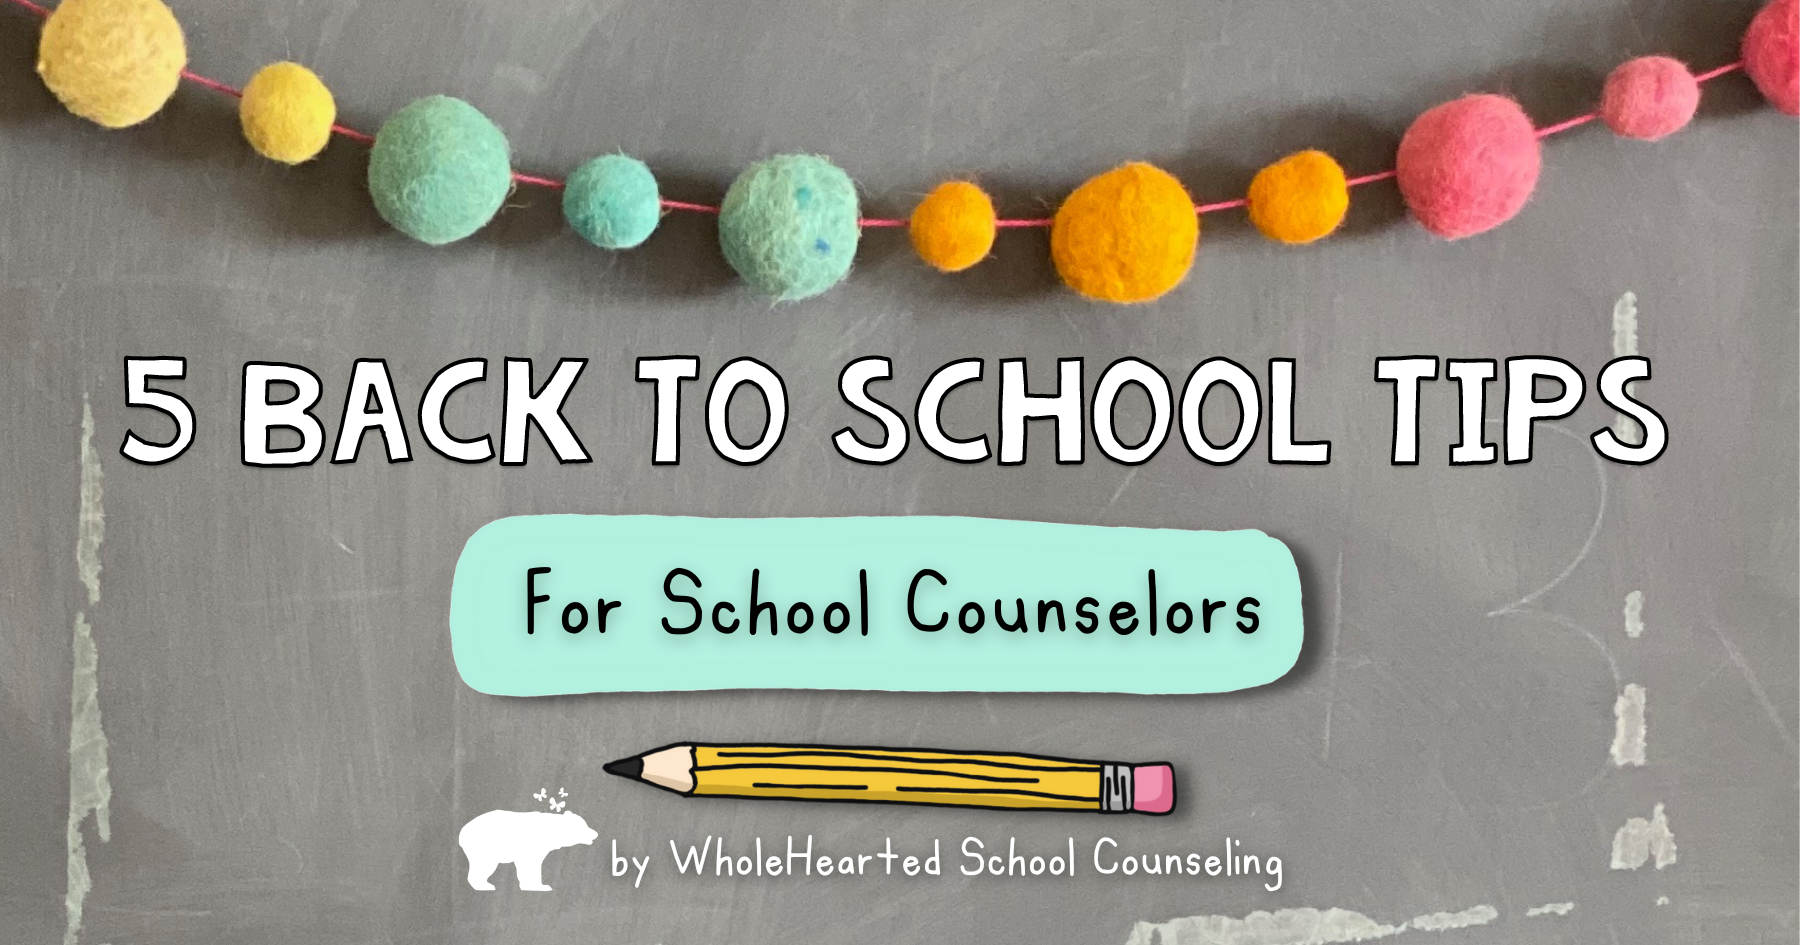 Chalkboard with tips for school counselors